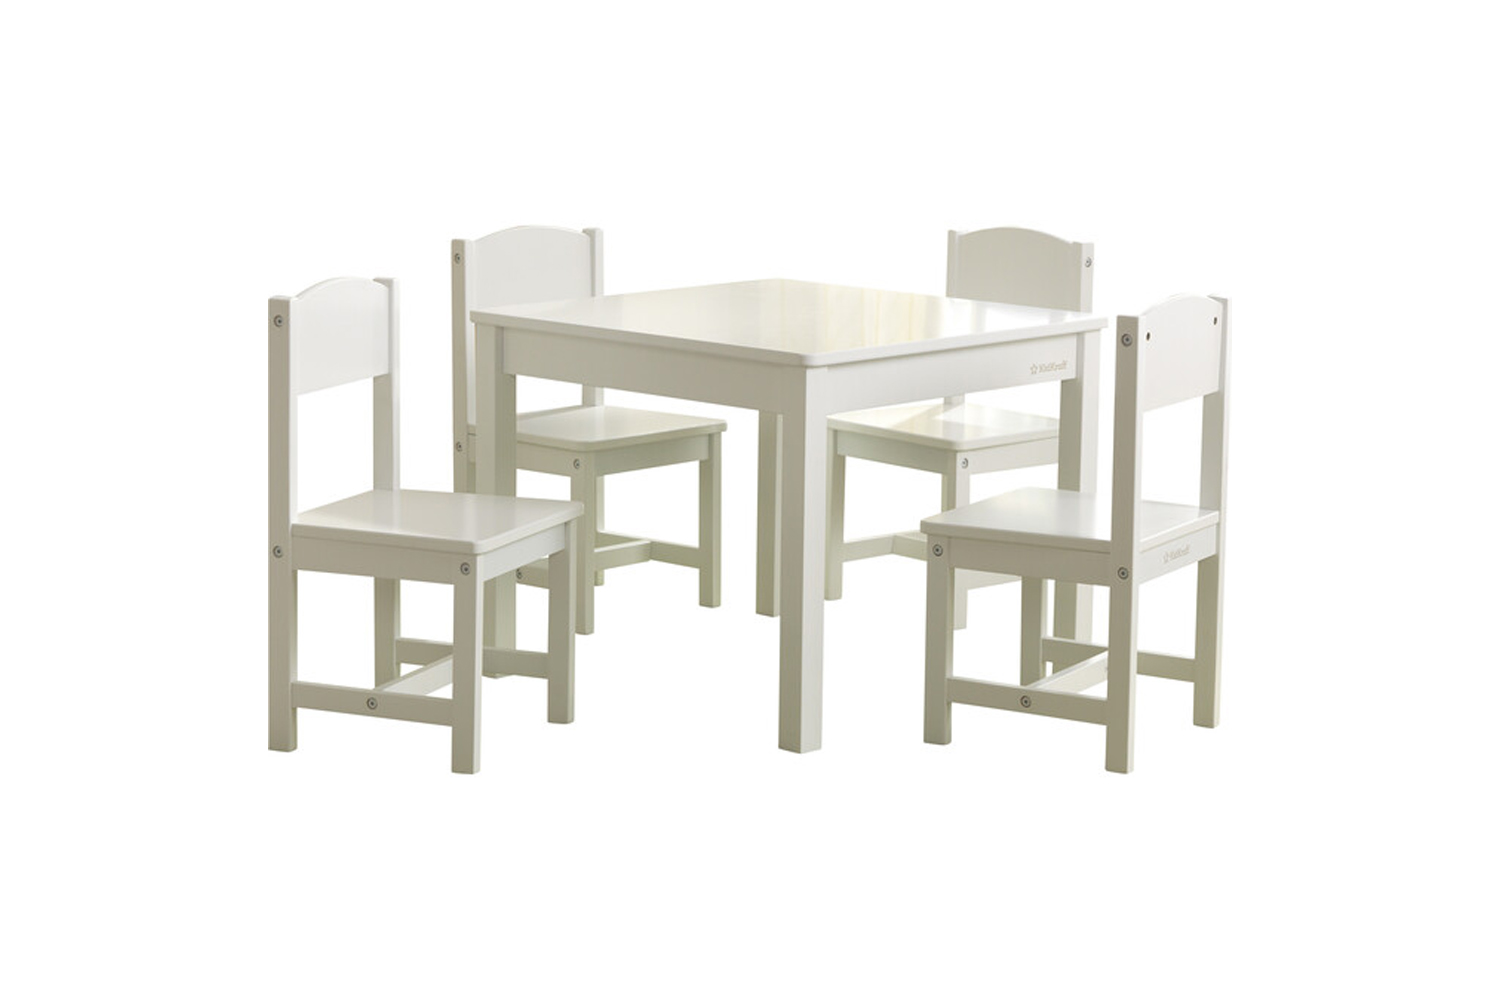 the kidkraft farmhouse table and chairs set in white is \$\174.99 on amazon. 10